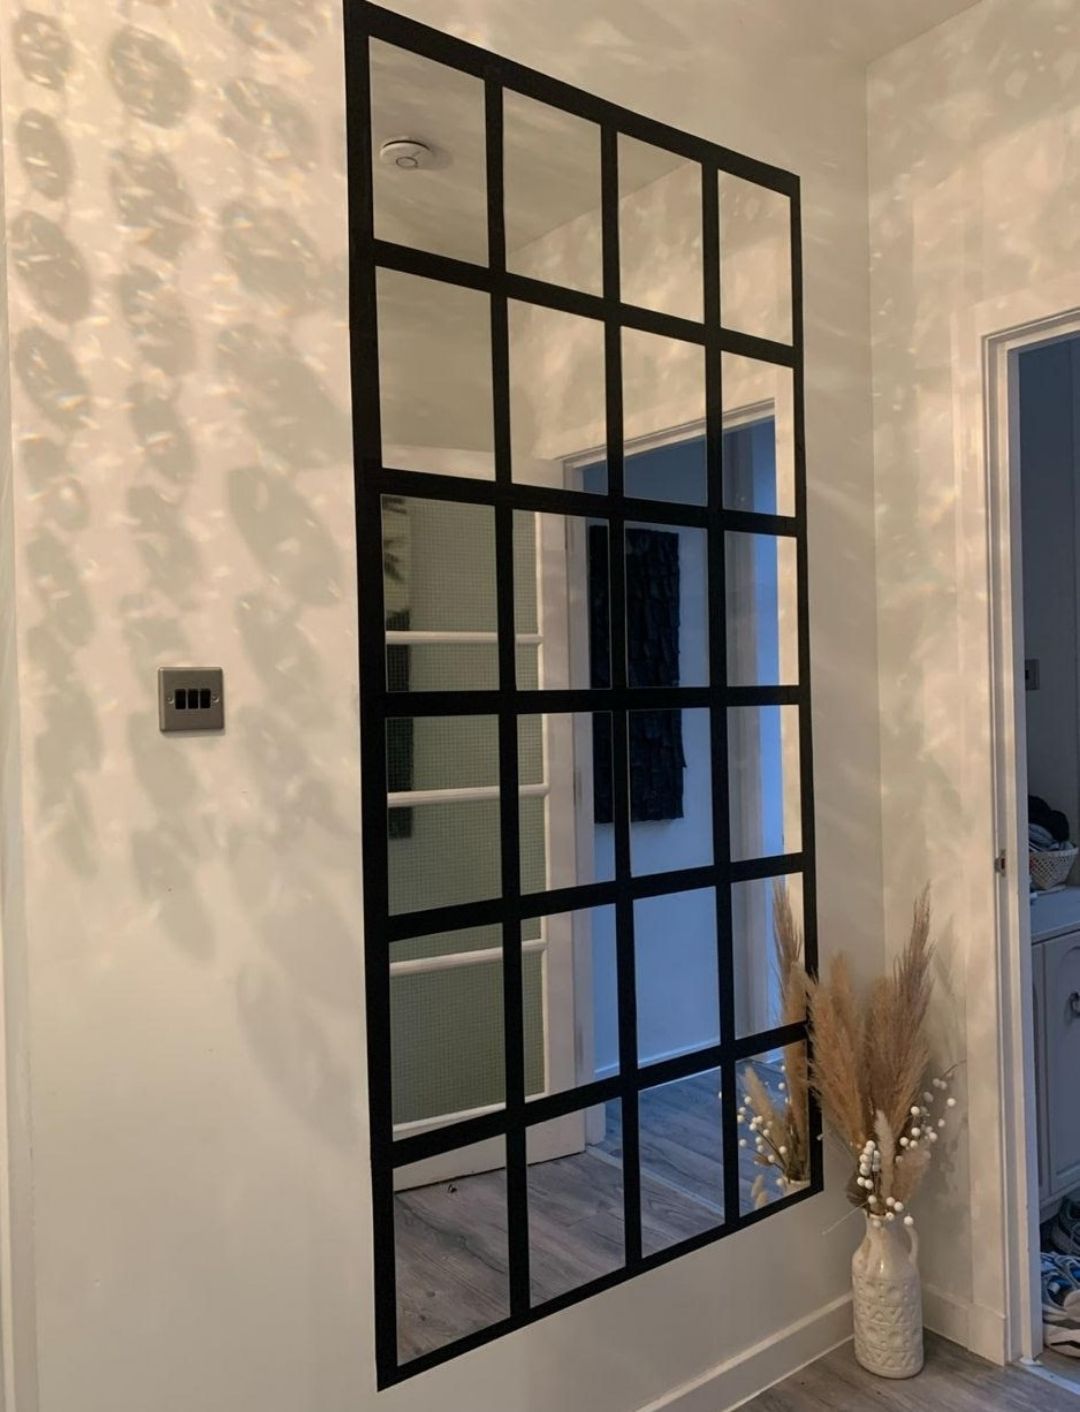 The Flipped Piece hallway with fabulous DIY mirror